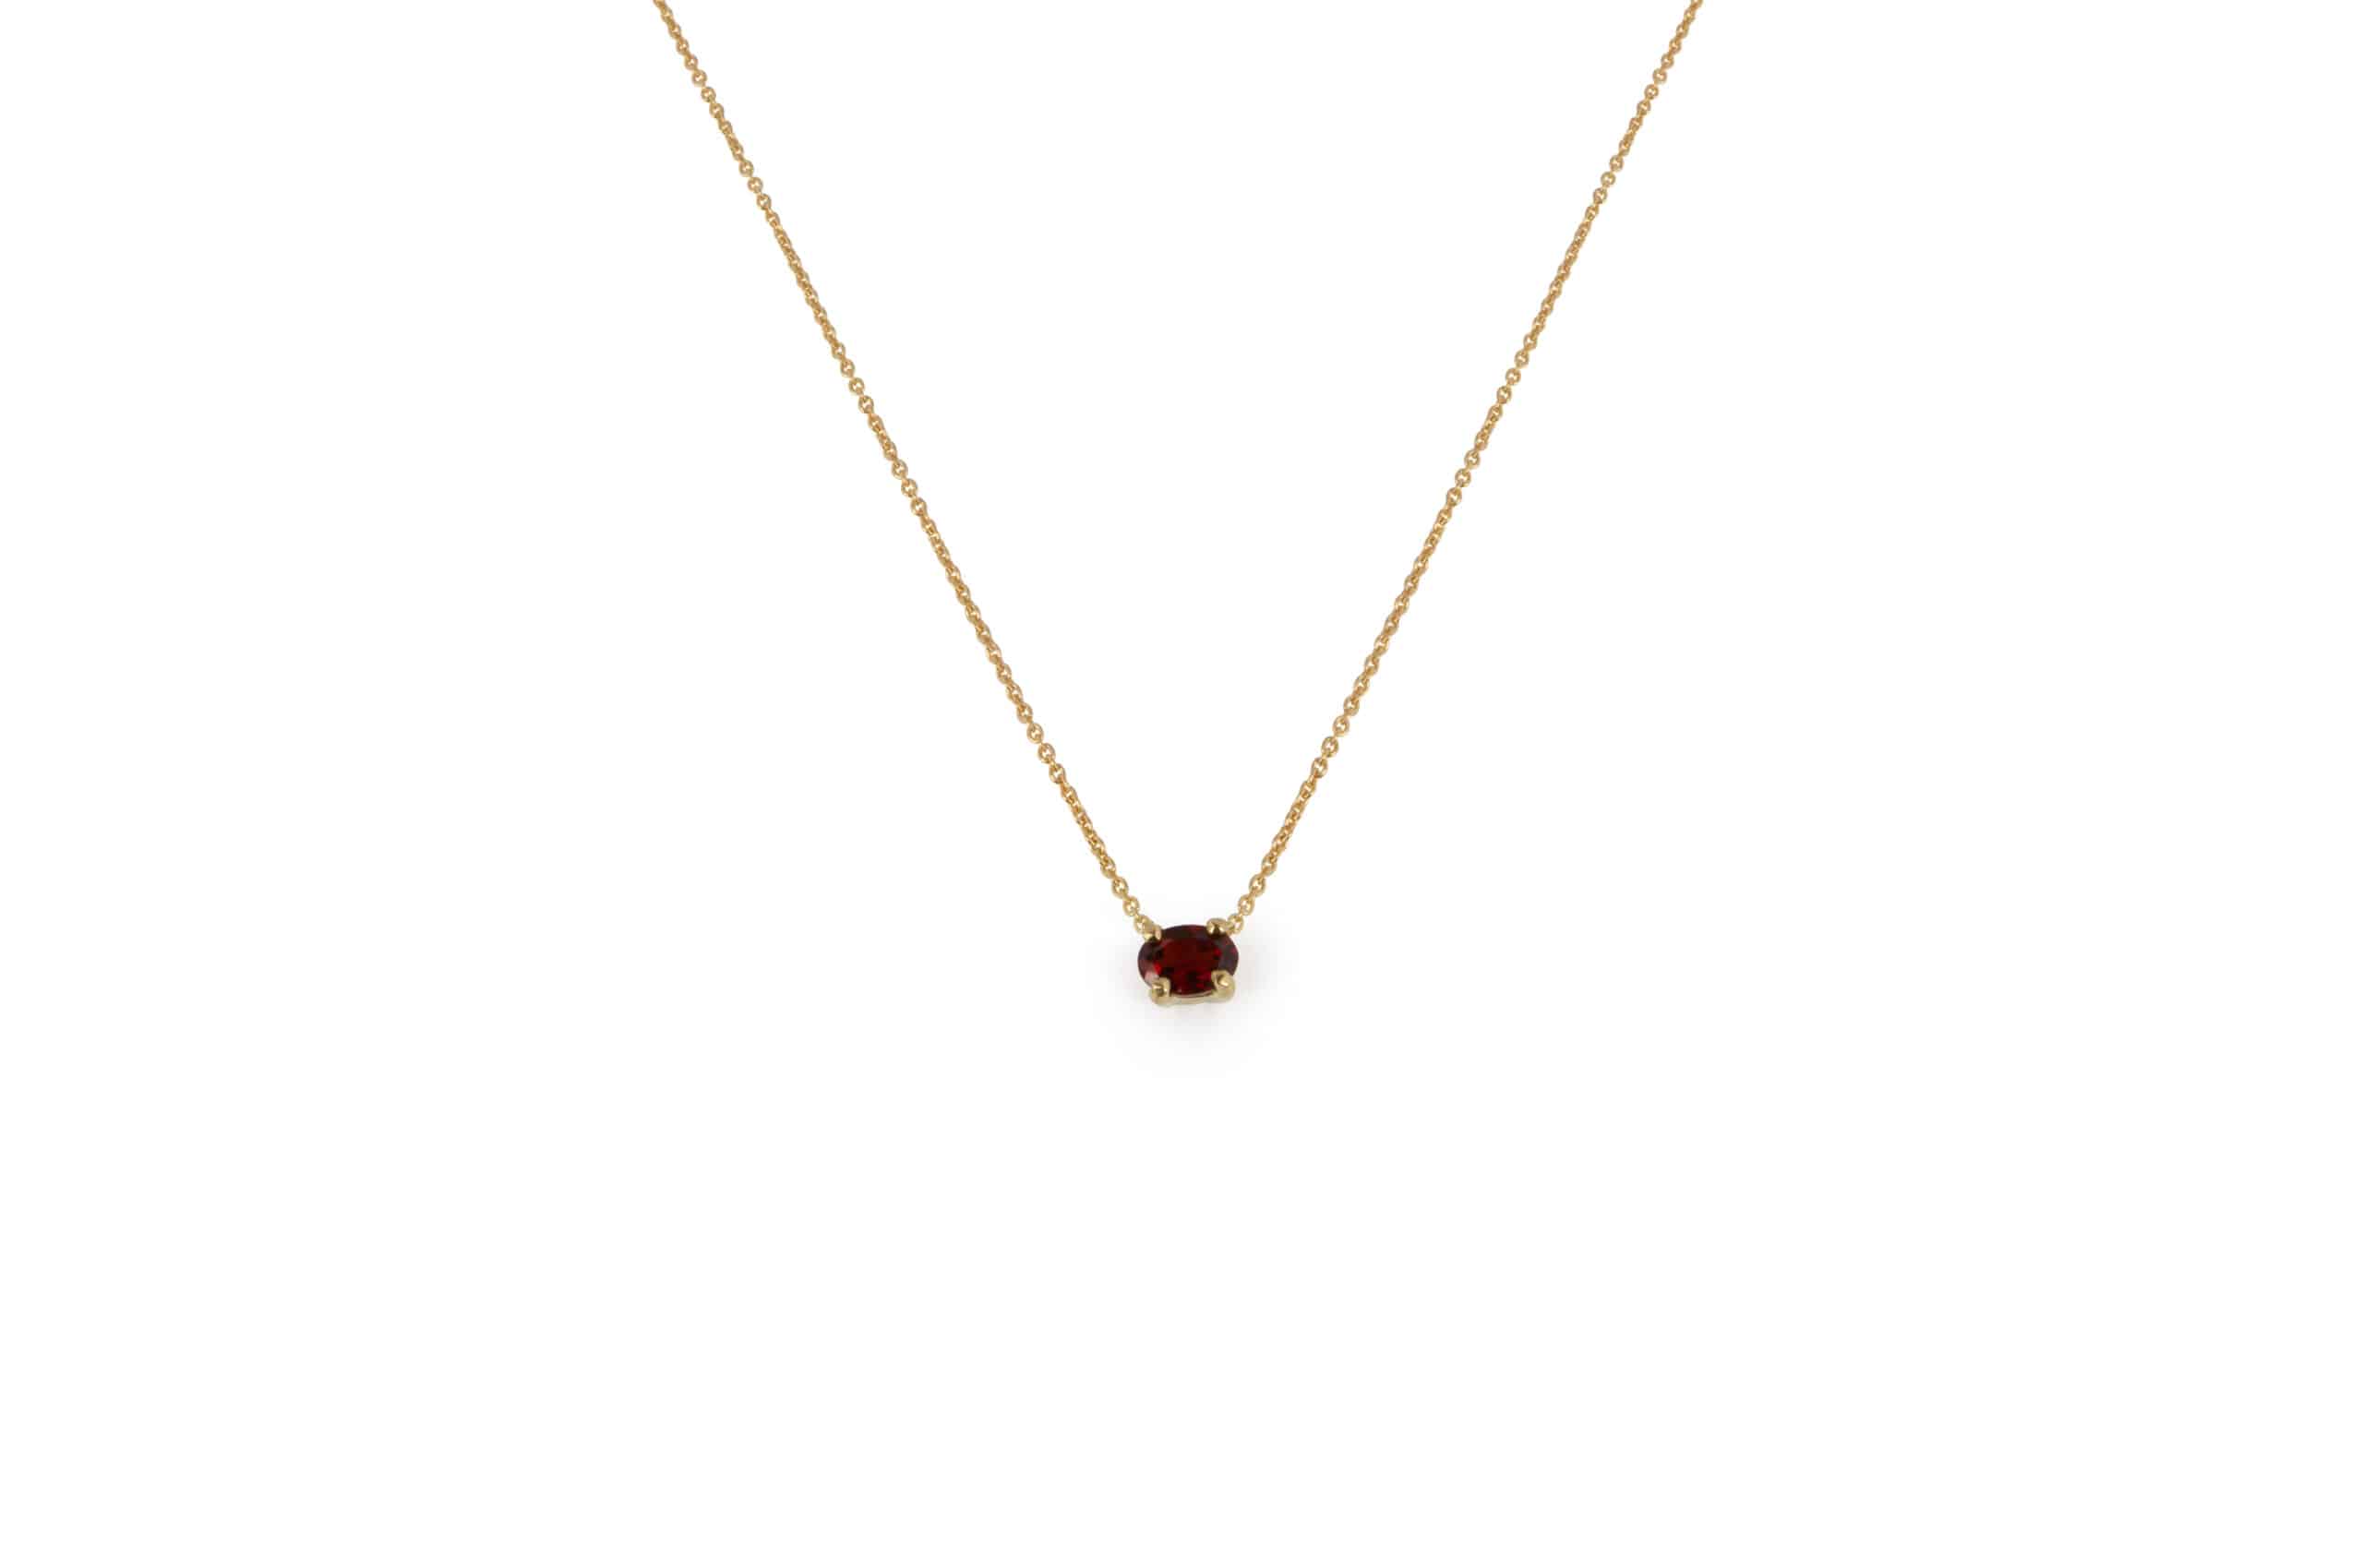 Wouters & Hendrix 18kt Gold Necklace with Garnet NGC003